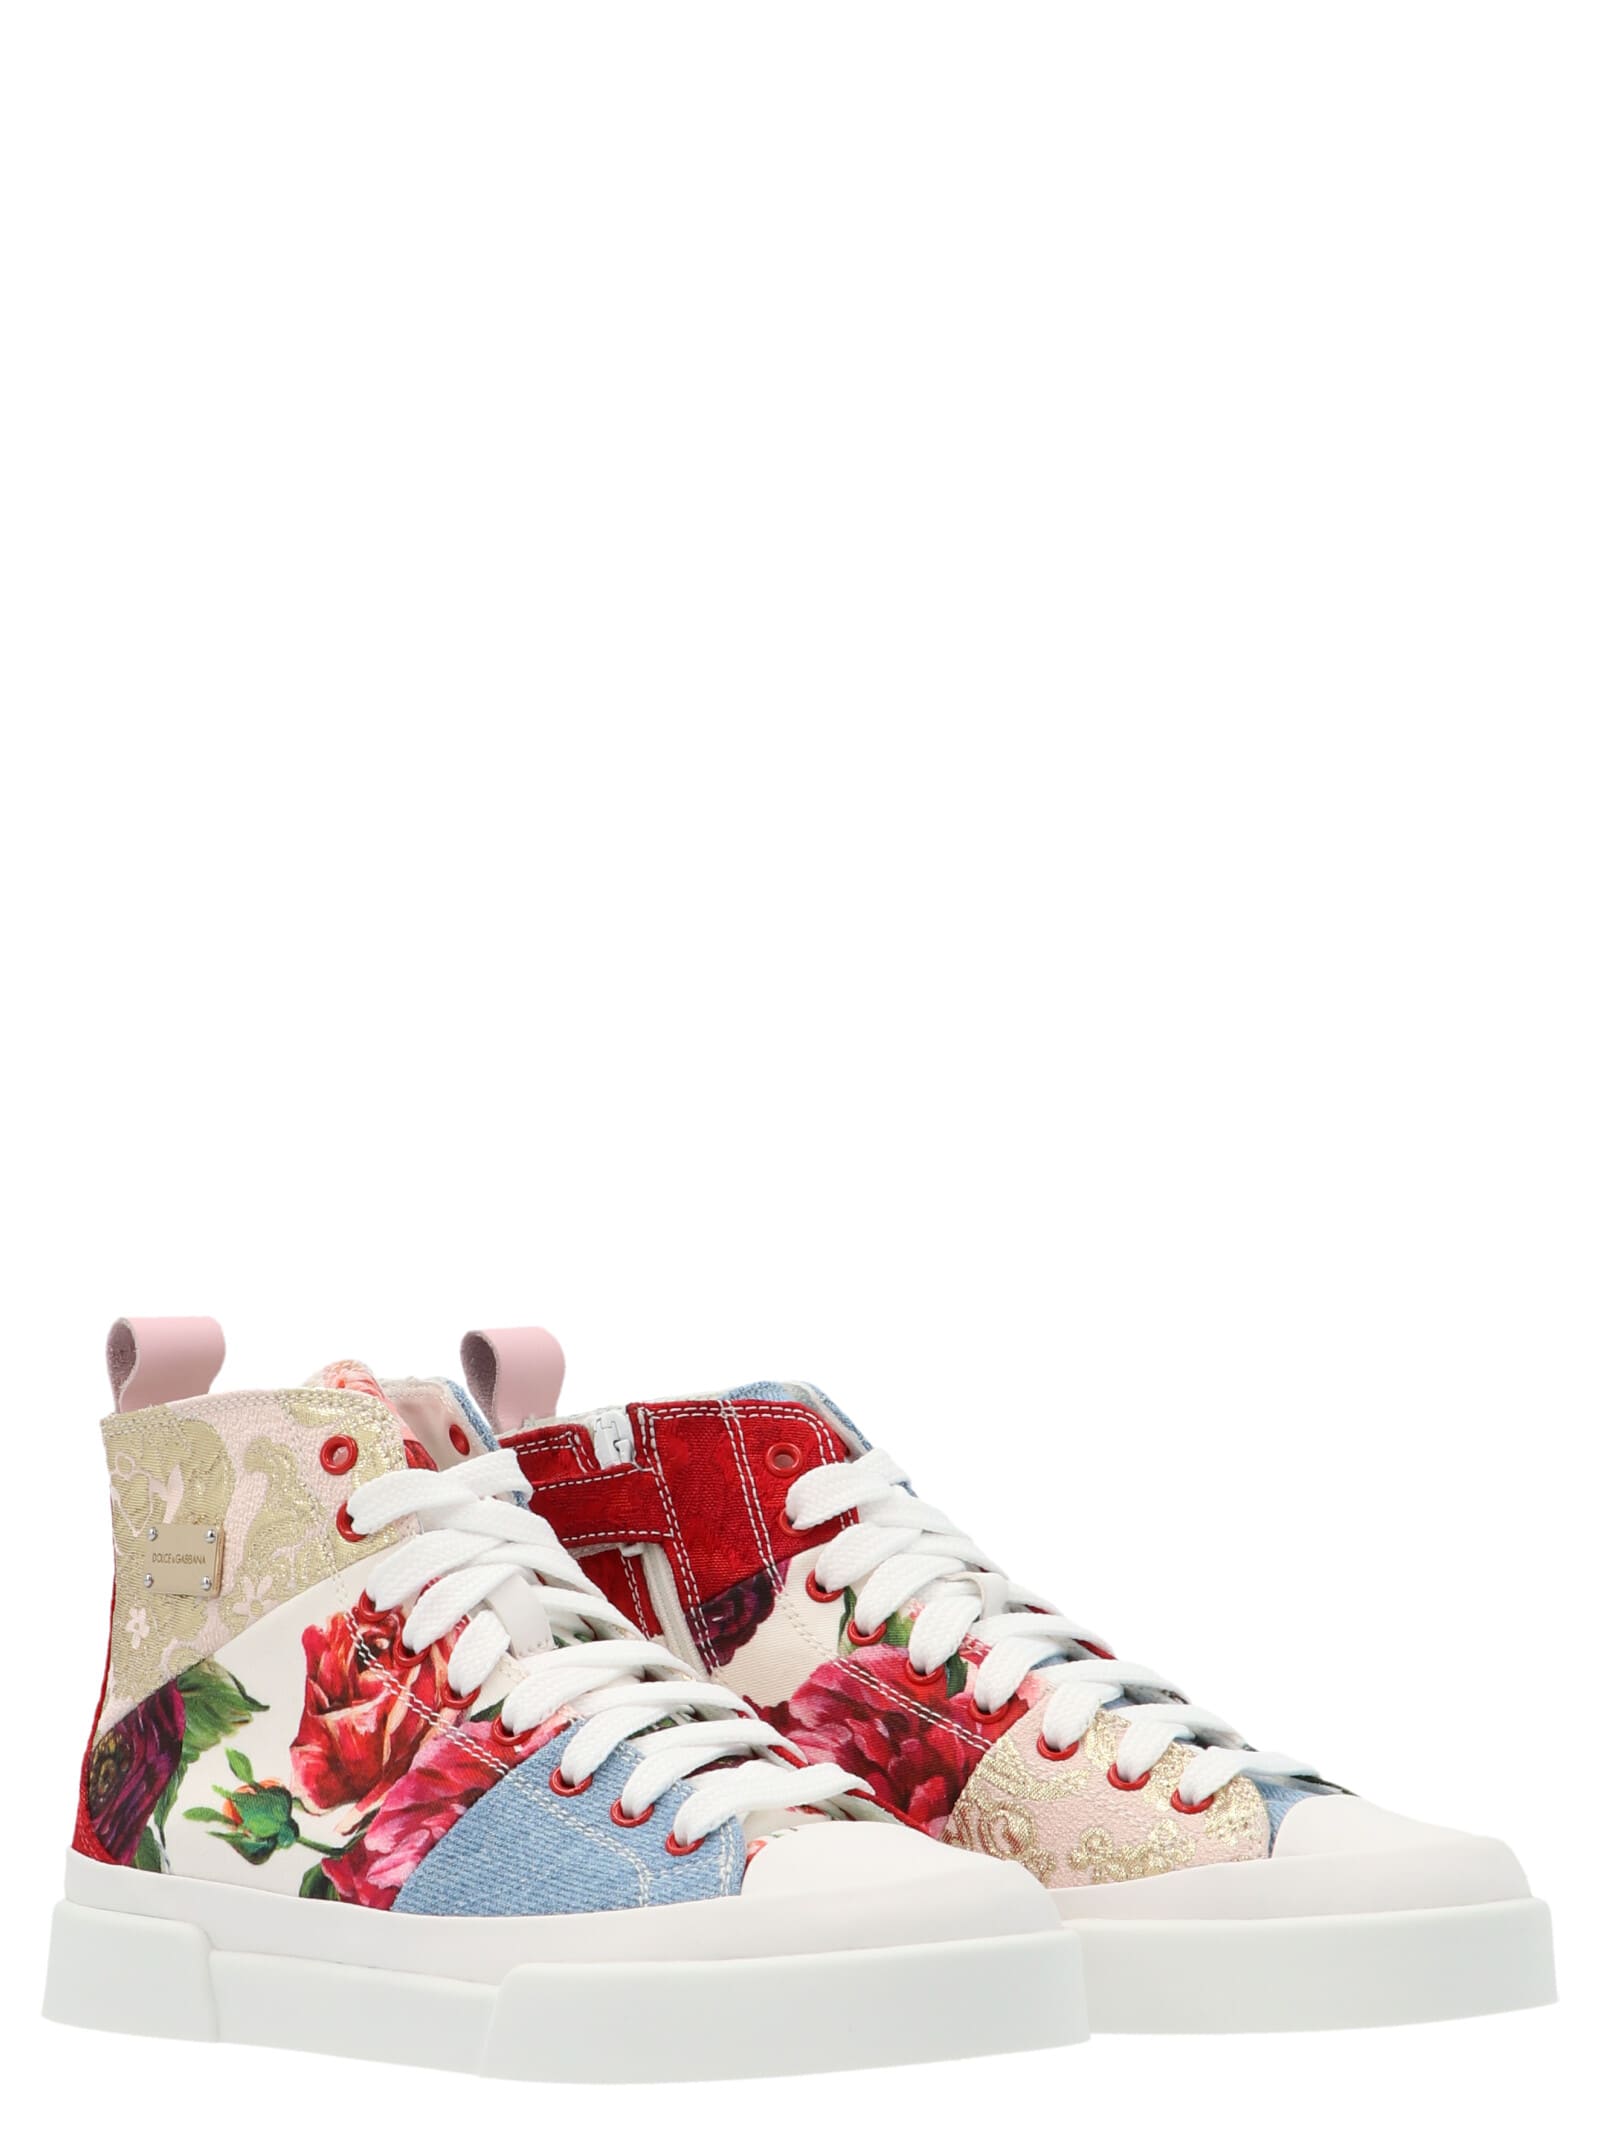 Buy Dolce & Gabbana mix Patchwork Shoes online, shop Dolce & Gabbana shoes with free shipping